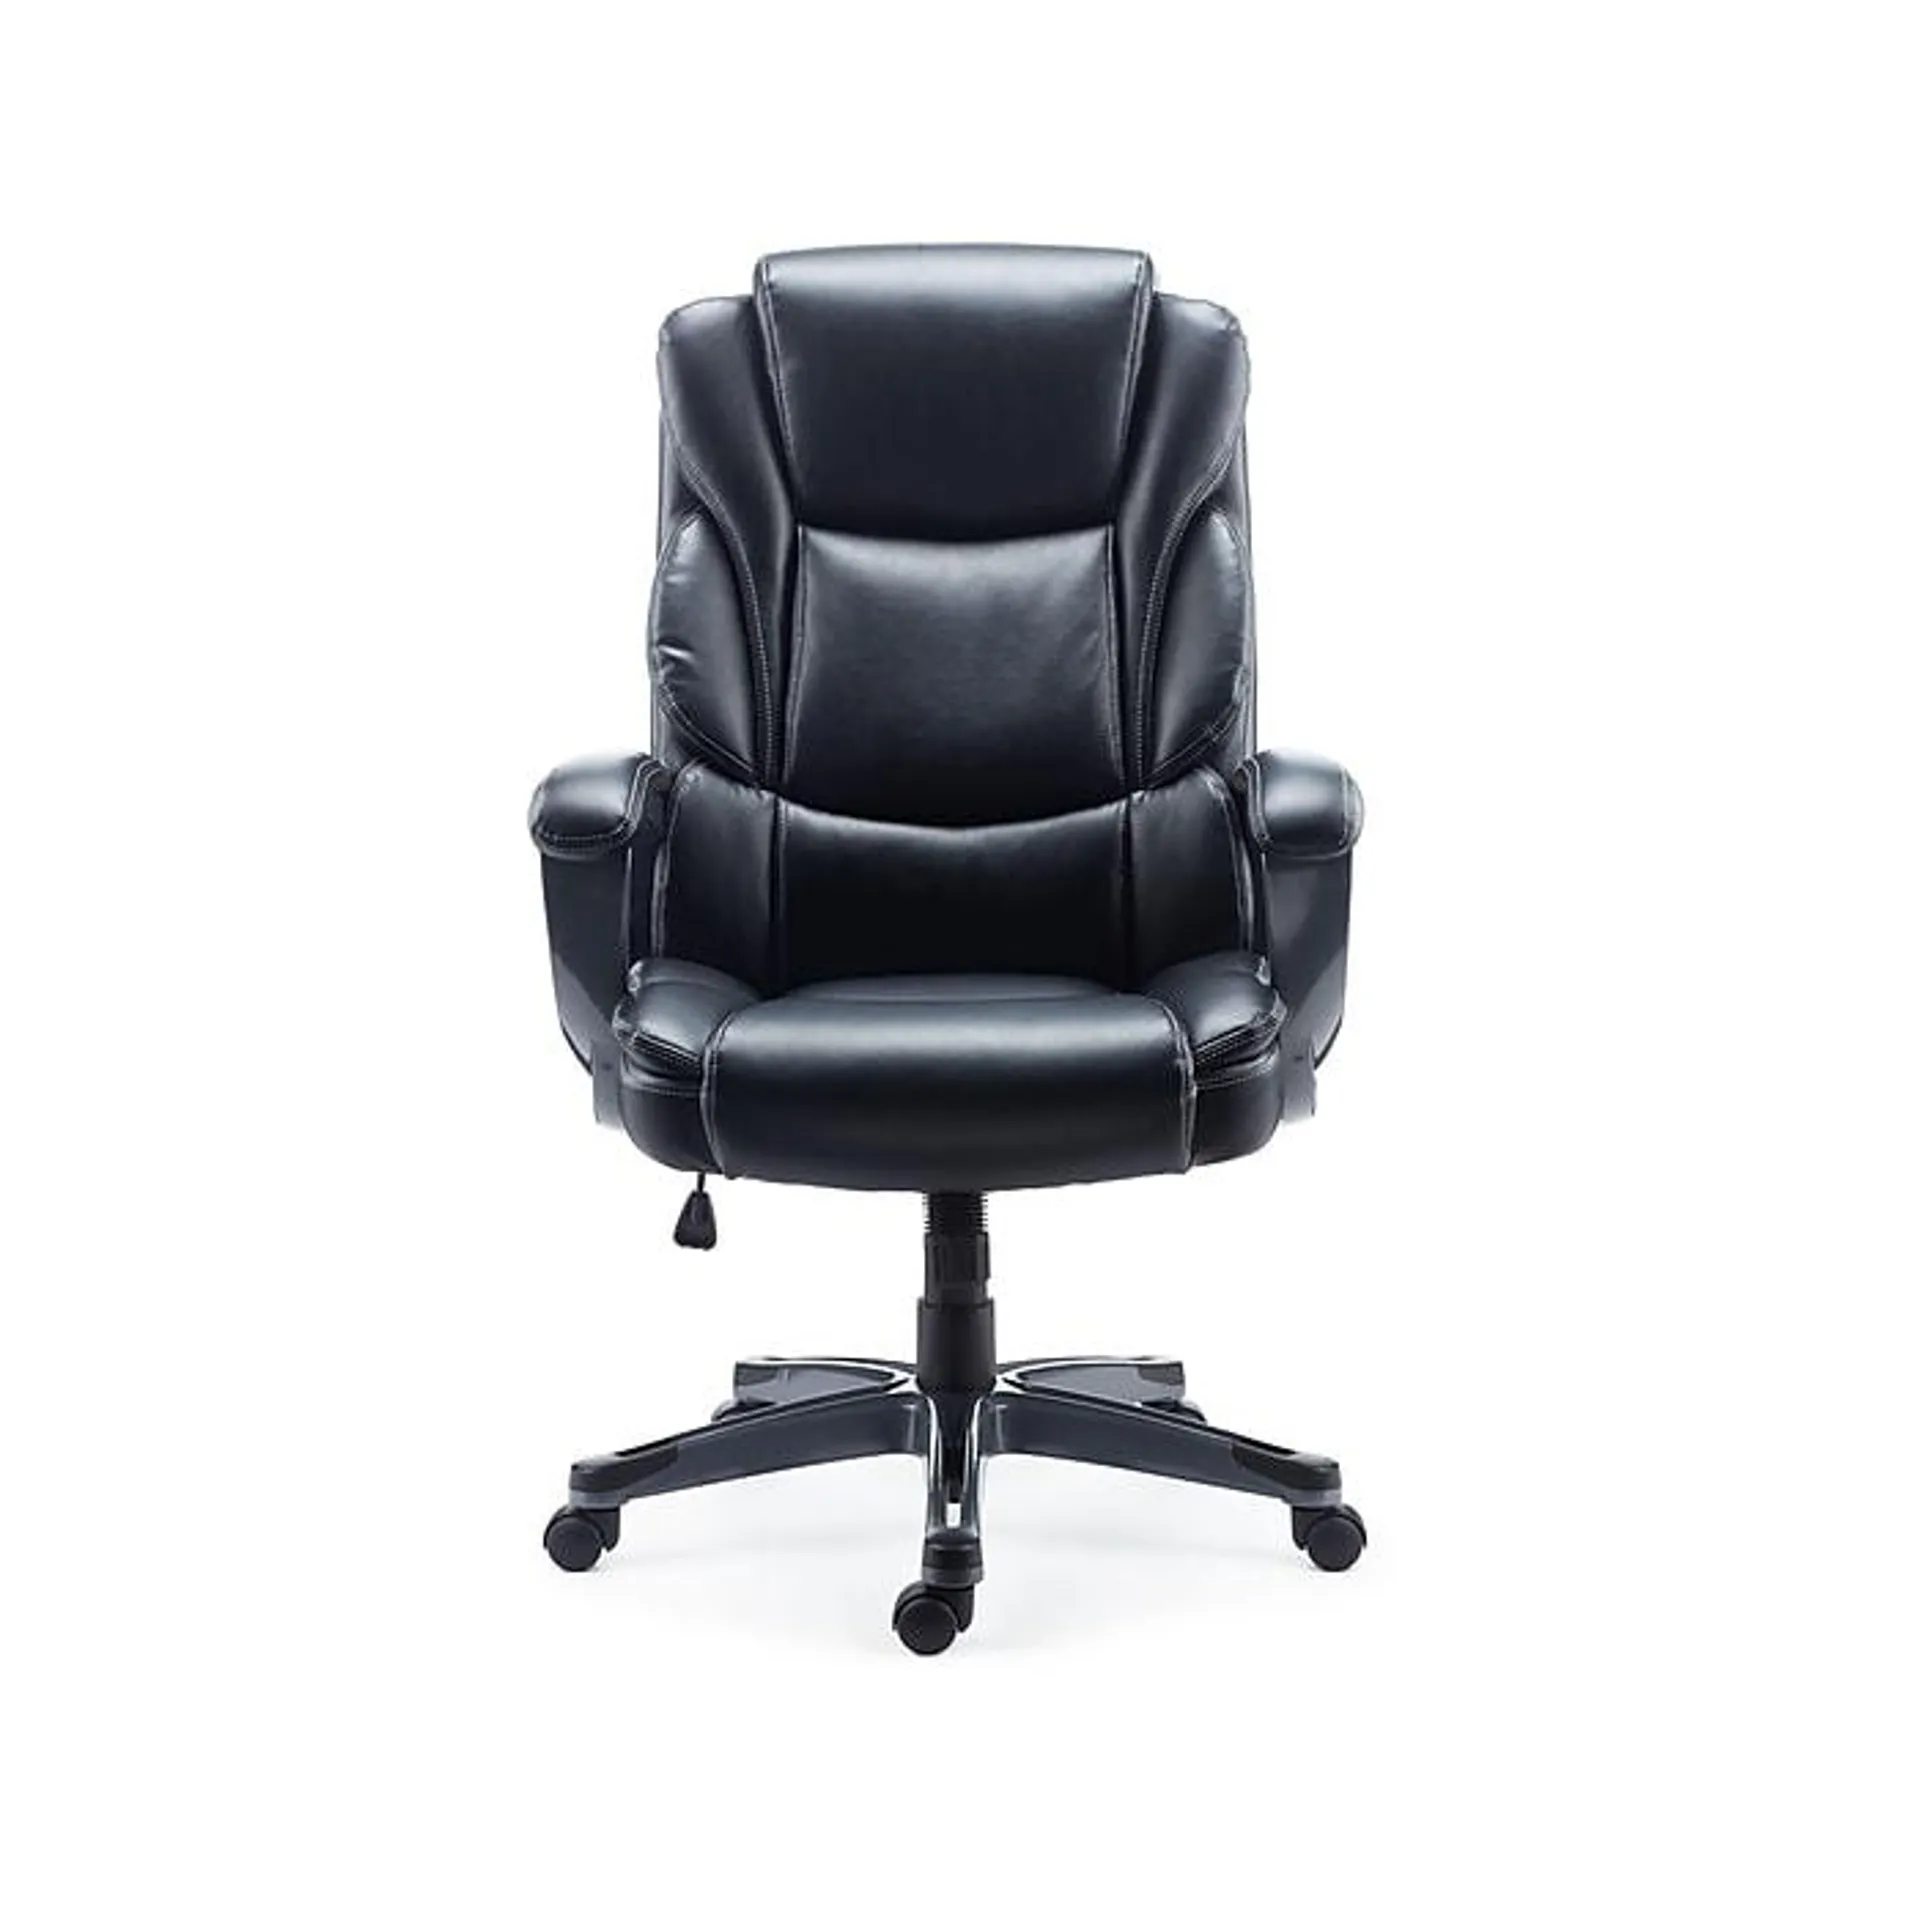 Staples Mcallum Bonded Leather Manager Chair,